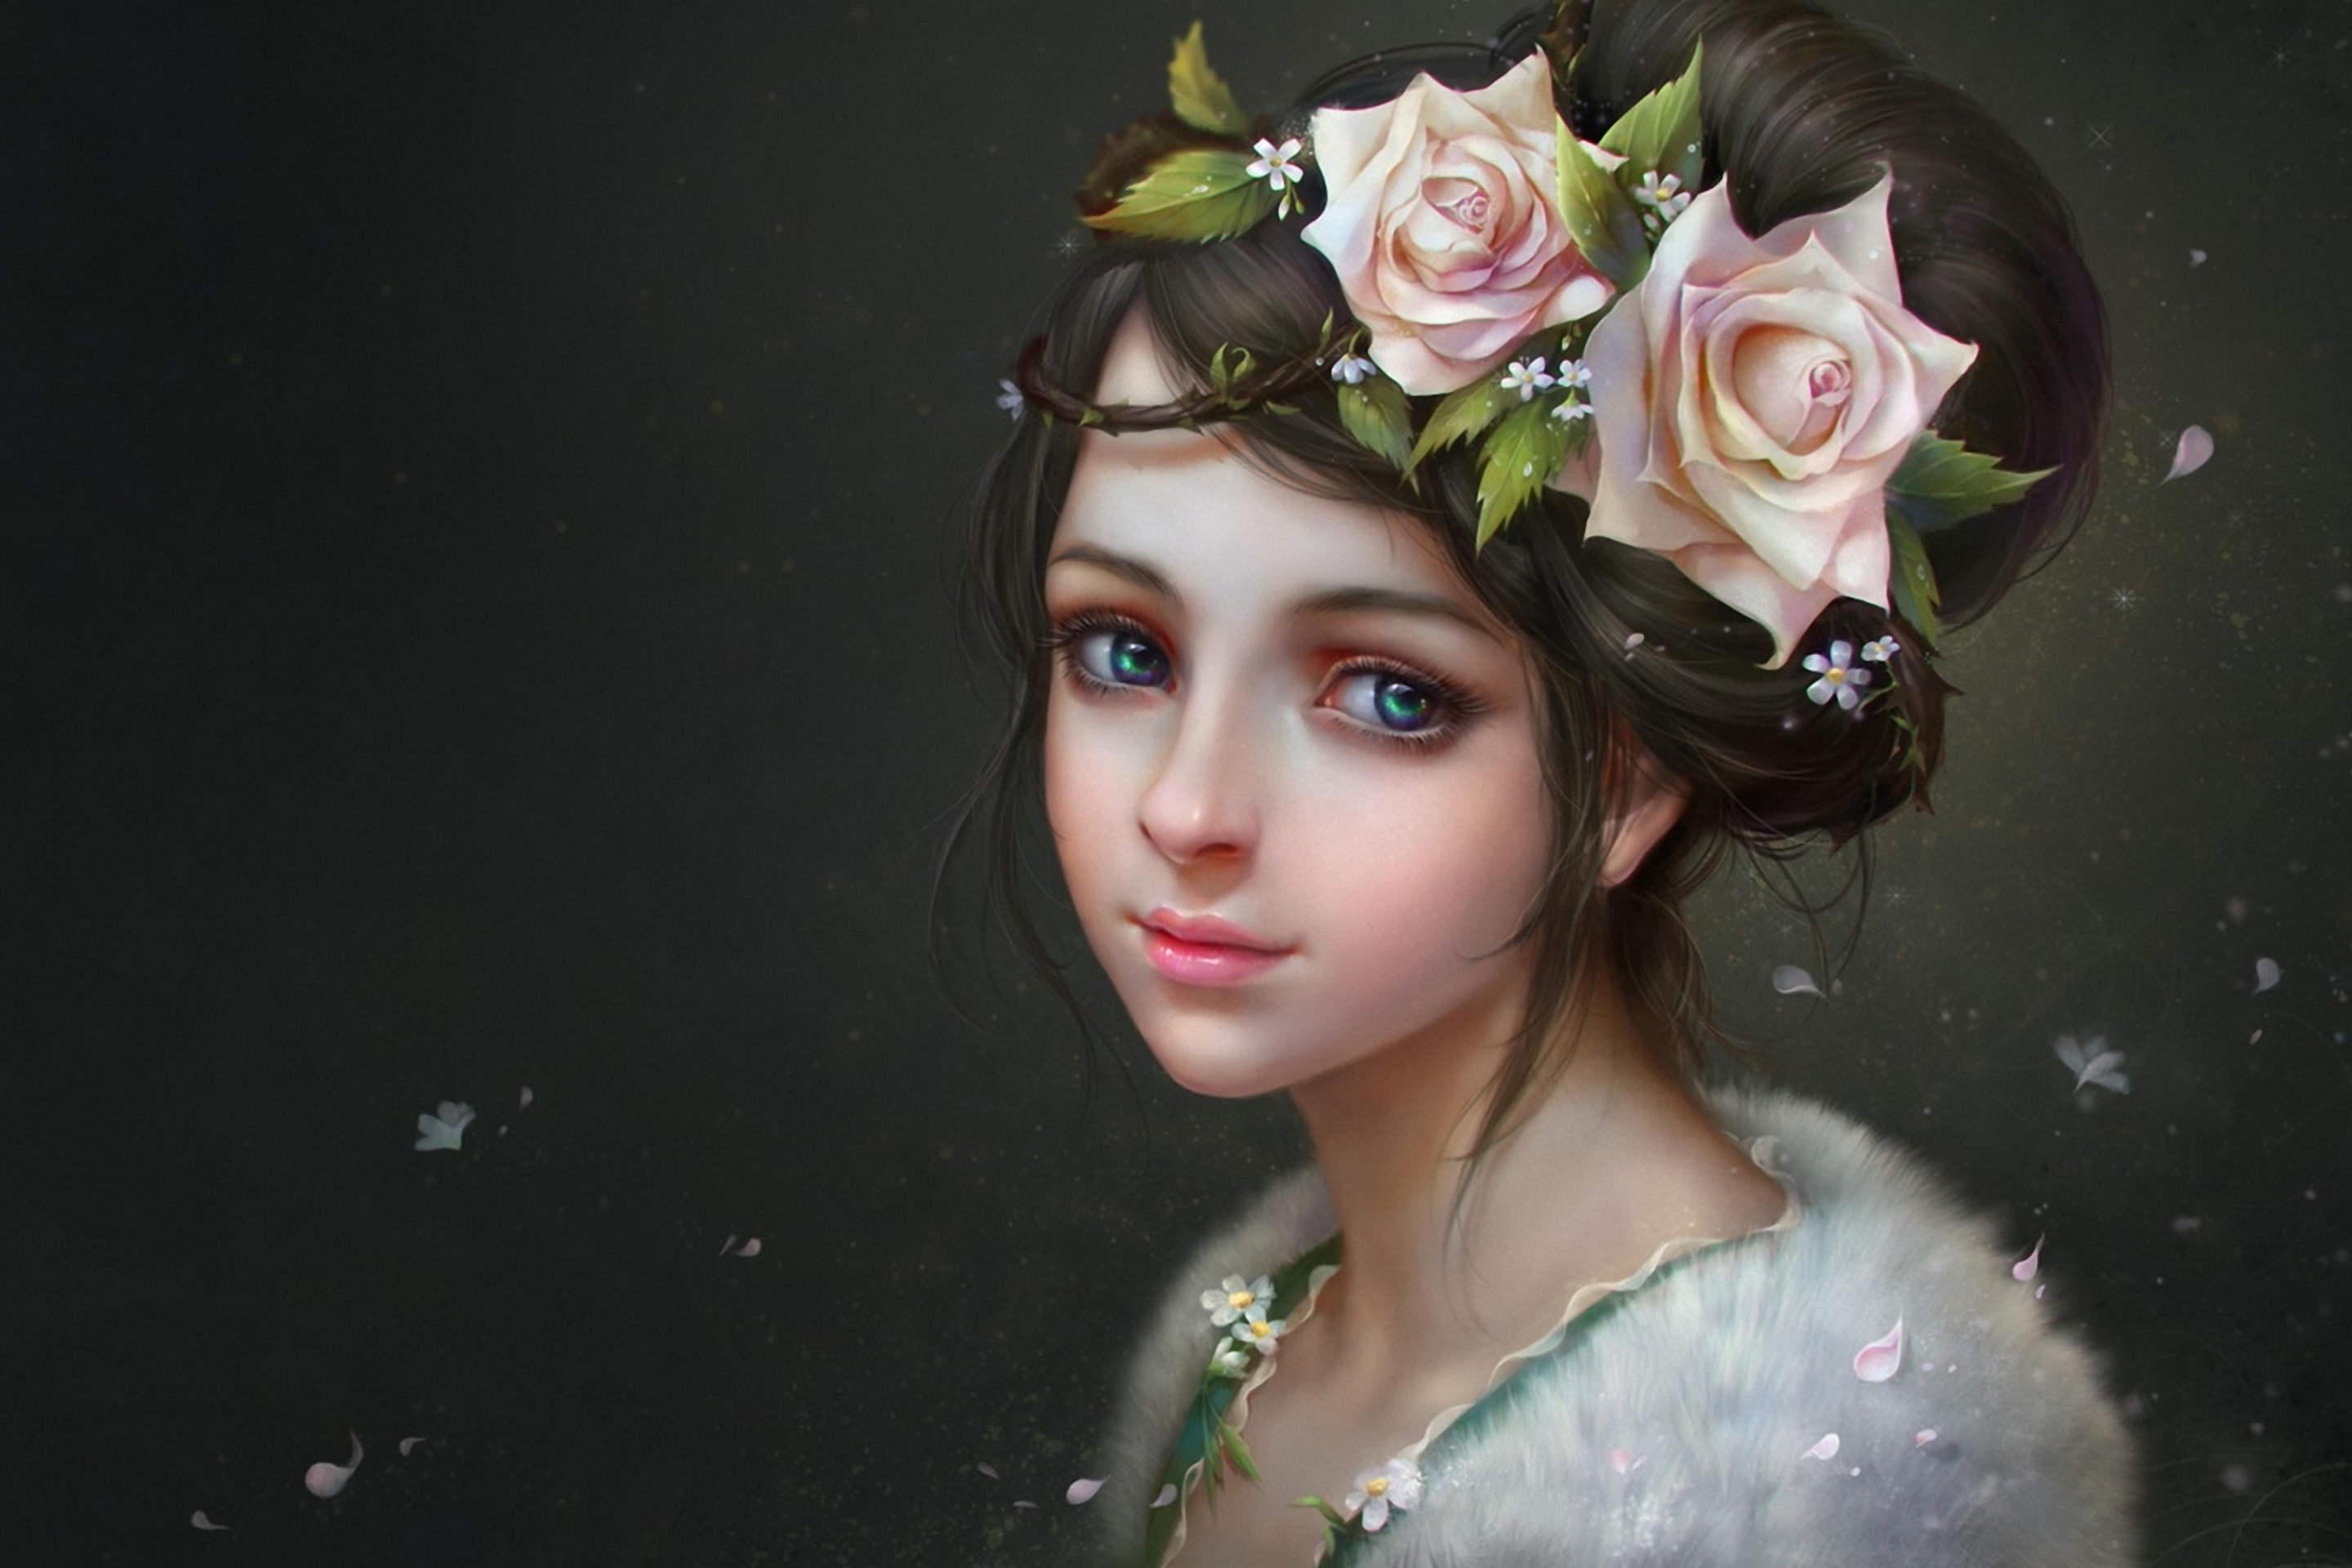 Girl With Roses In Her Hair Painting screenshot #1 2880x1920